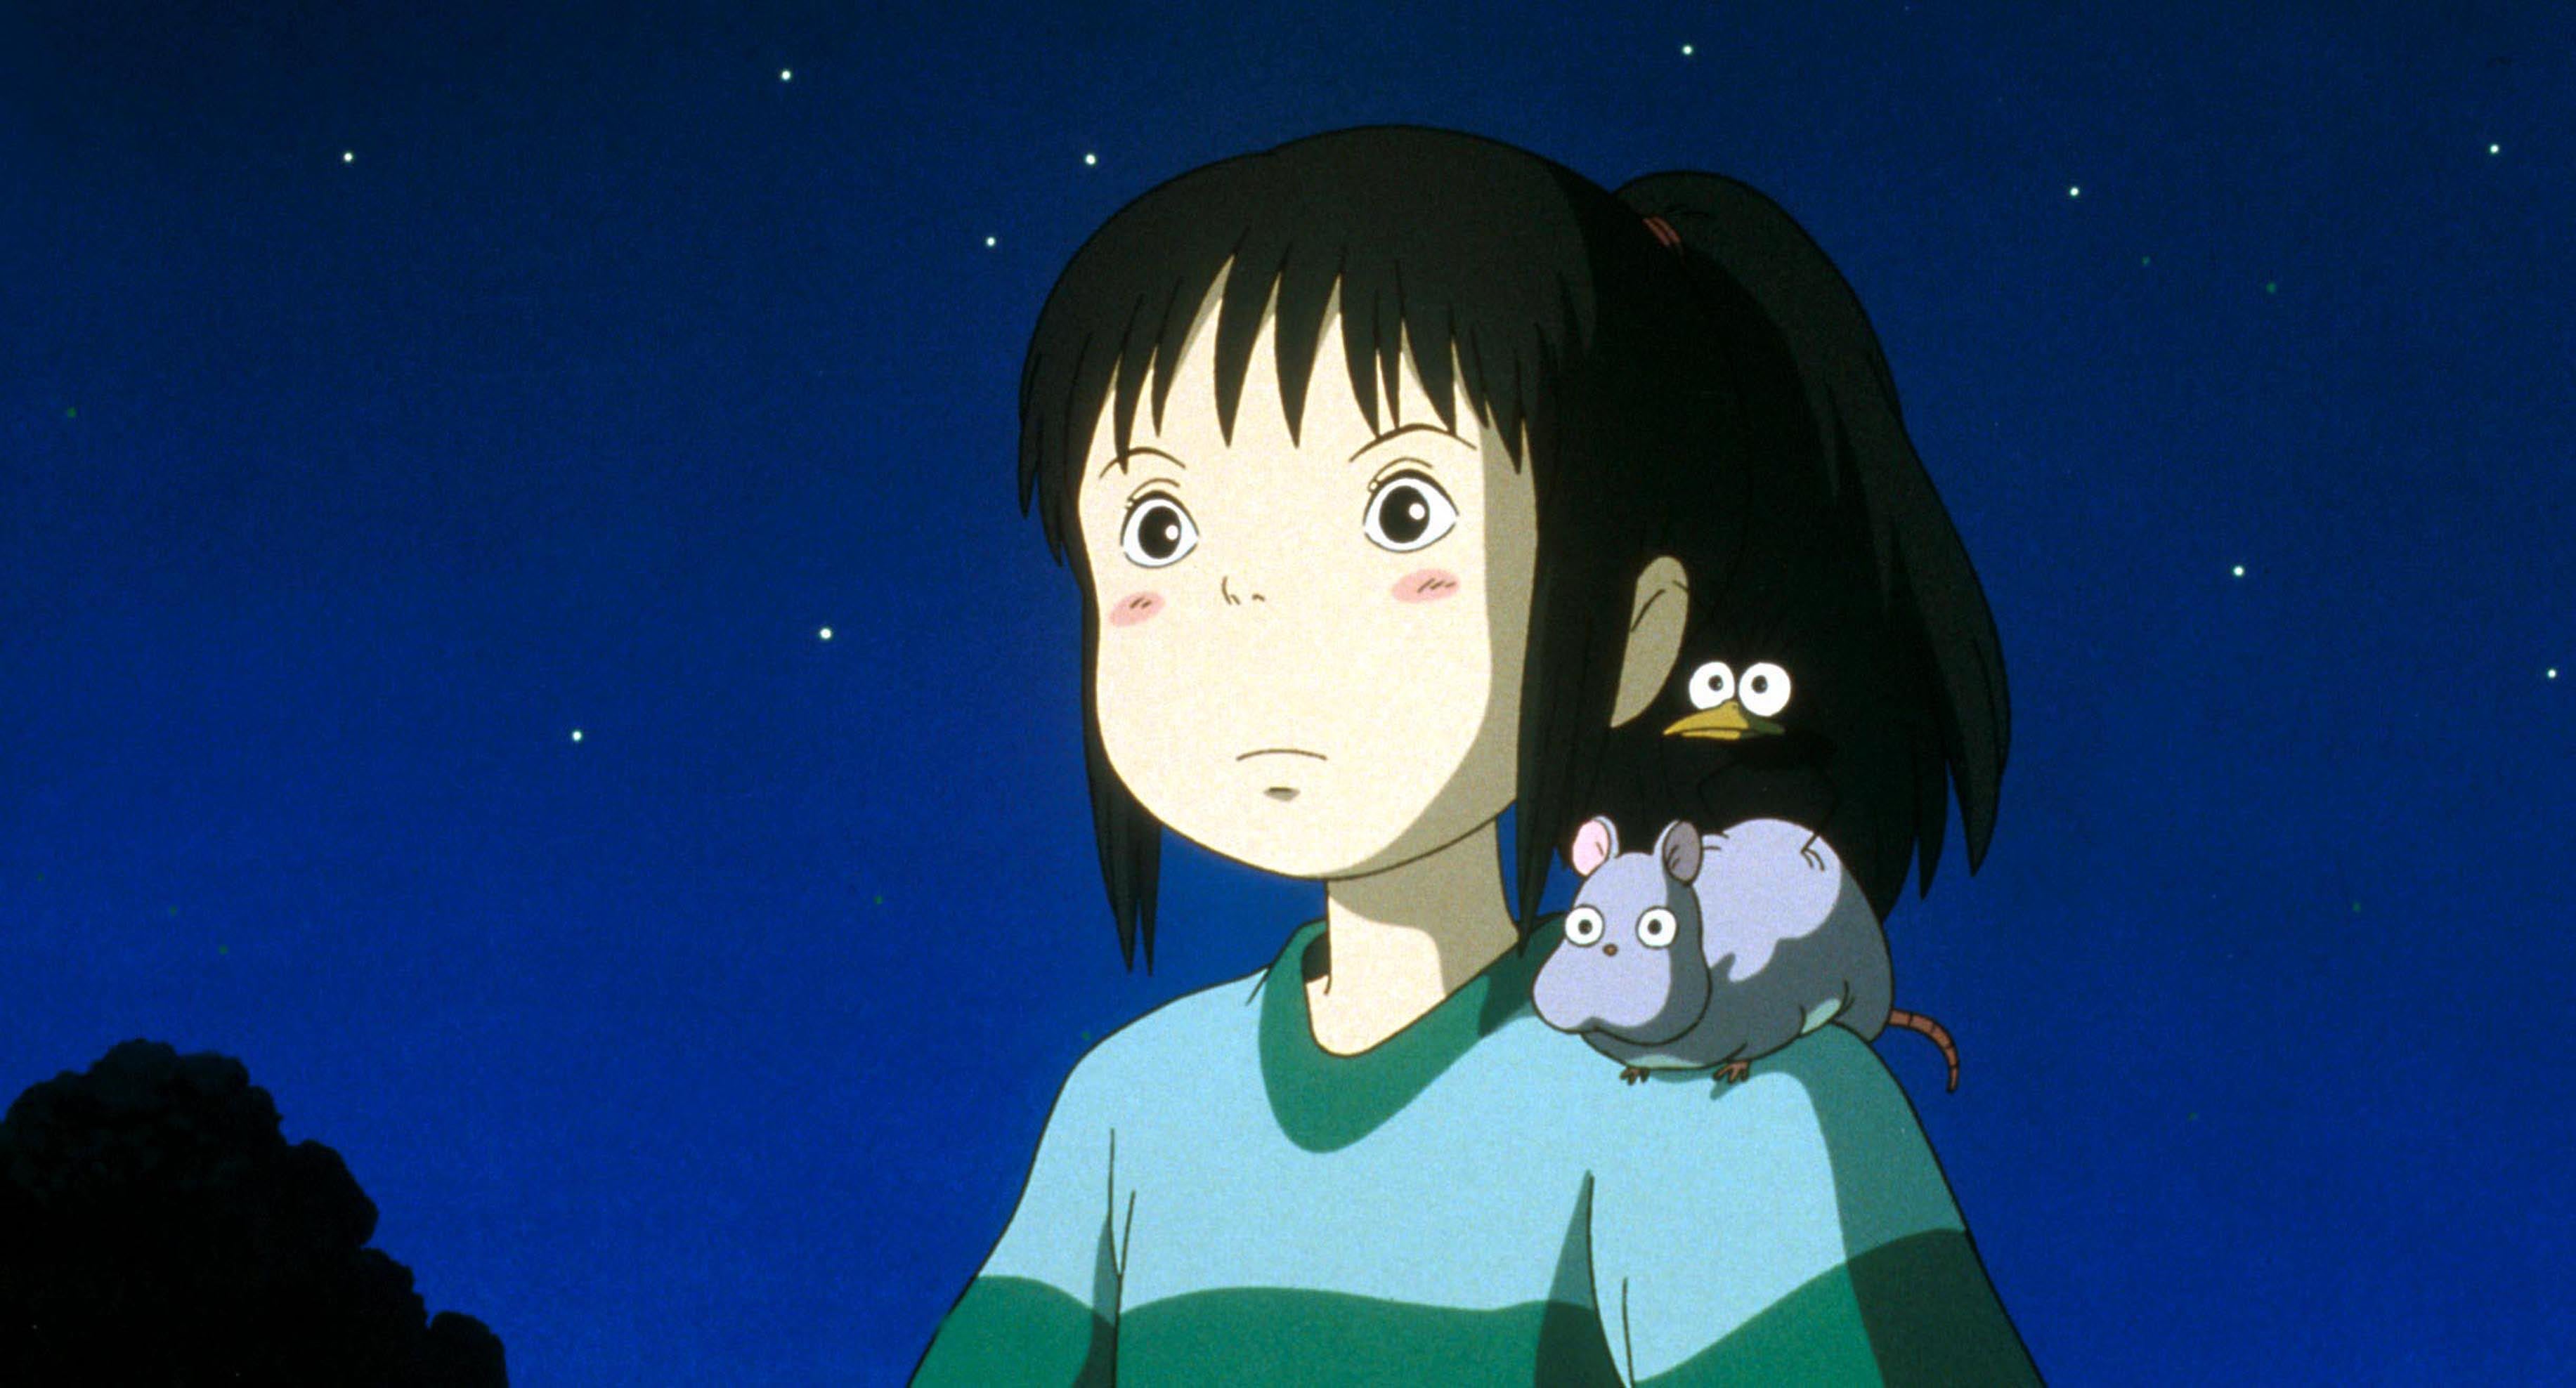 Miyazaki takes a child’s eye view of the world and yet his films never turn syrupy